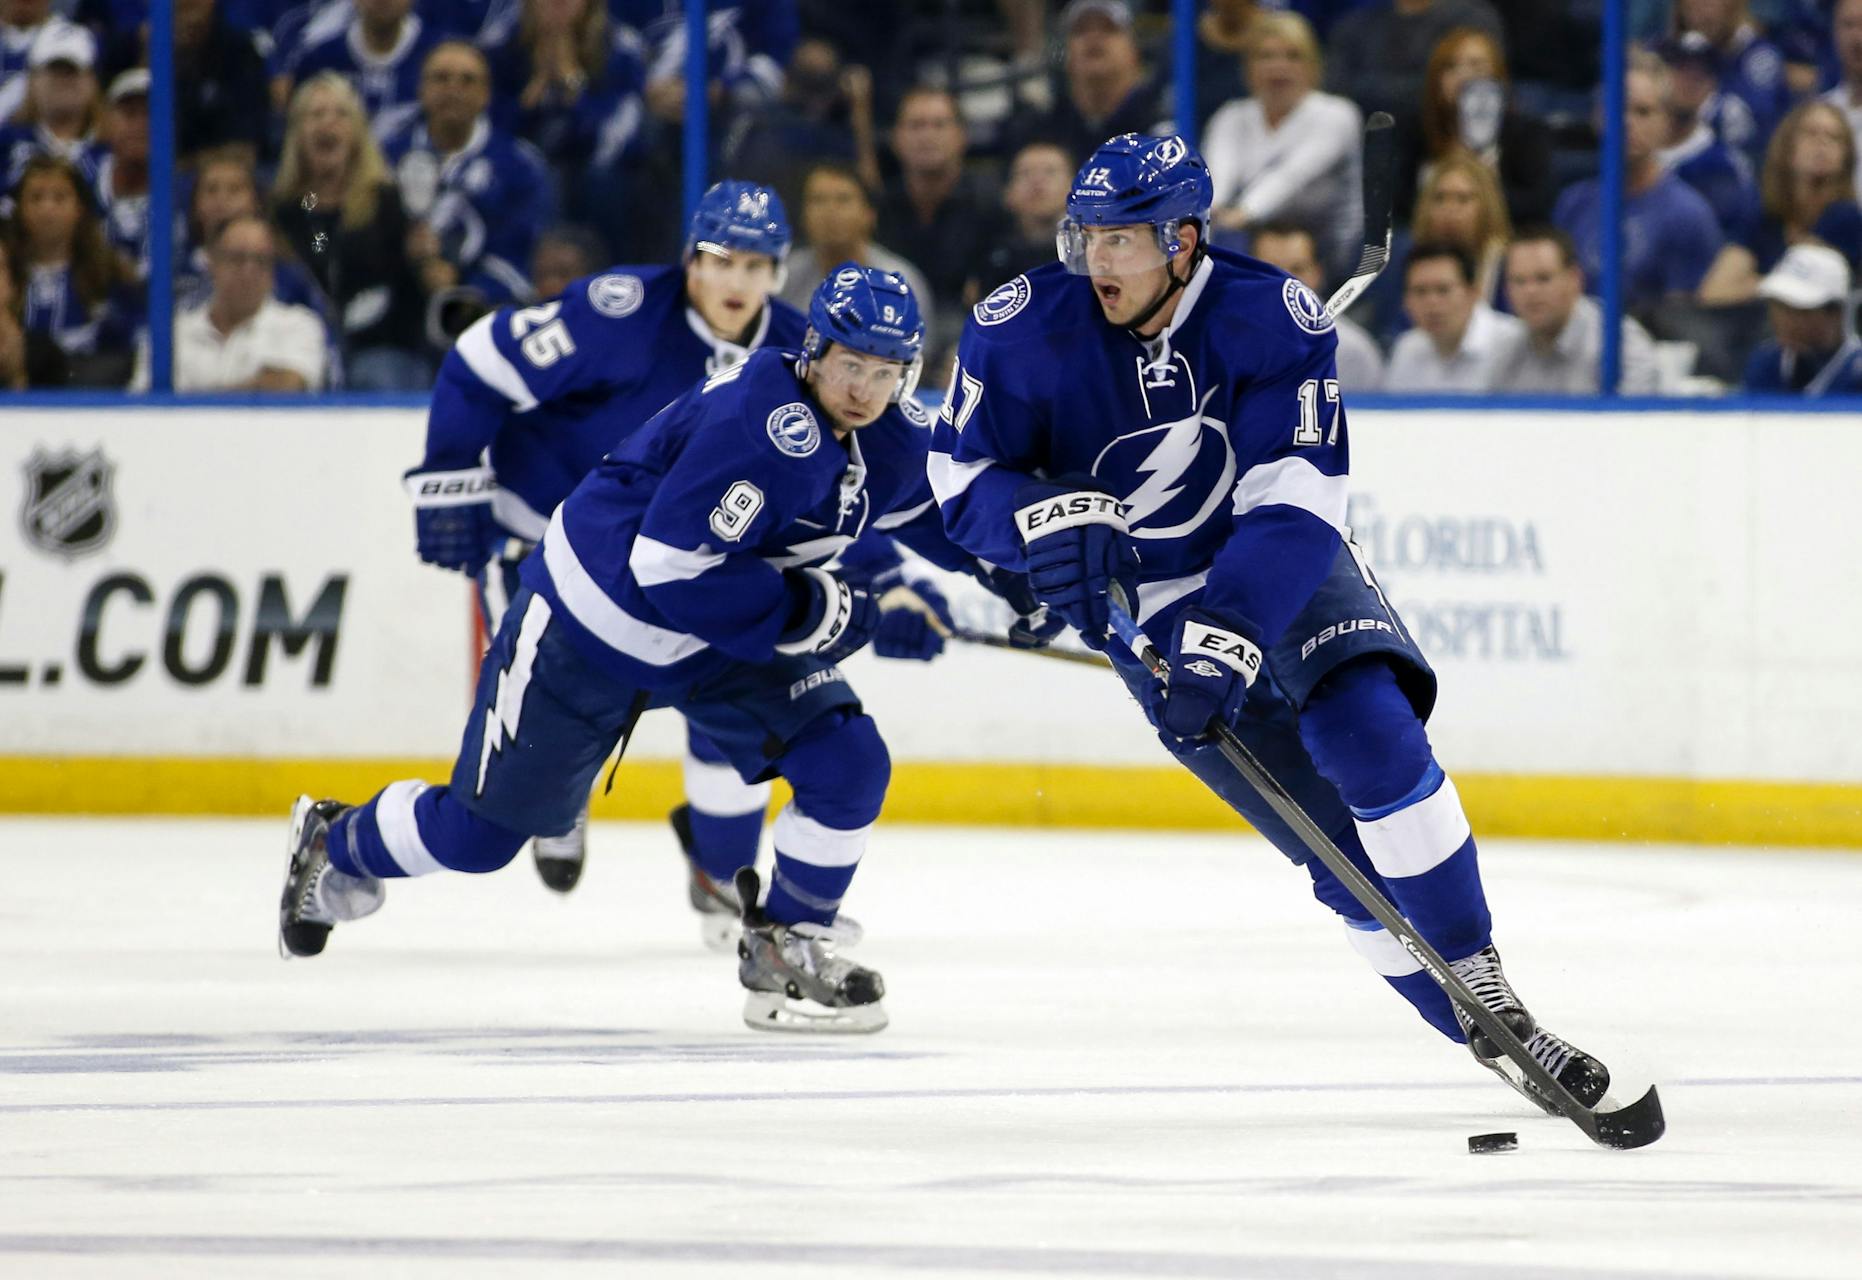 Amalie Oil, Other Lightning Sponsors Cashing In On Stanley Cup Final